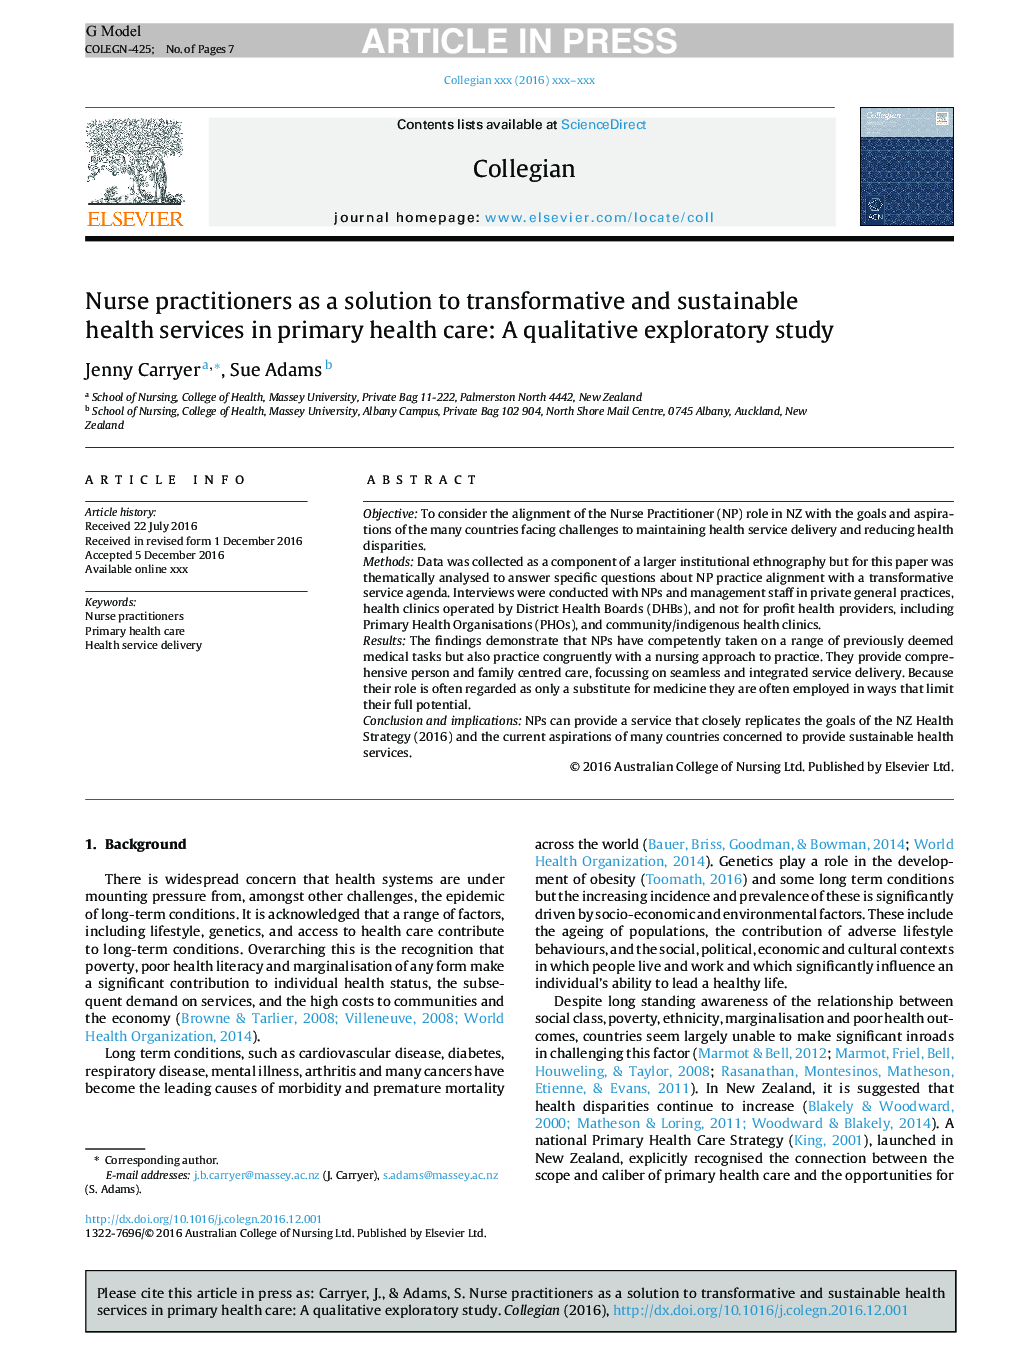 Nurse practitioners as a solution to transformative and sustainable health services in primary health care: A qualitative exploratory study